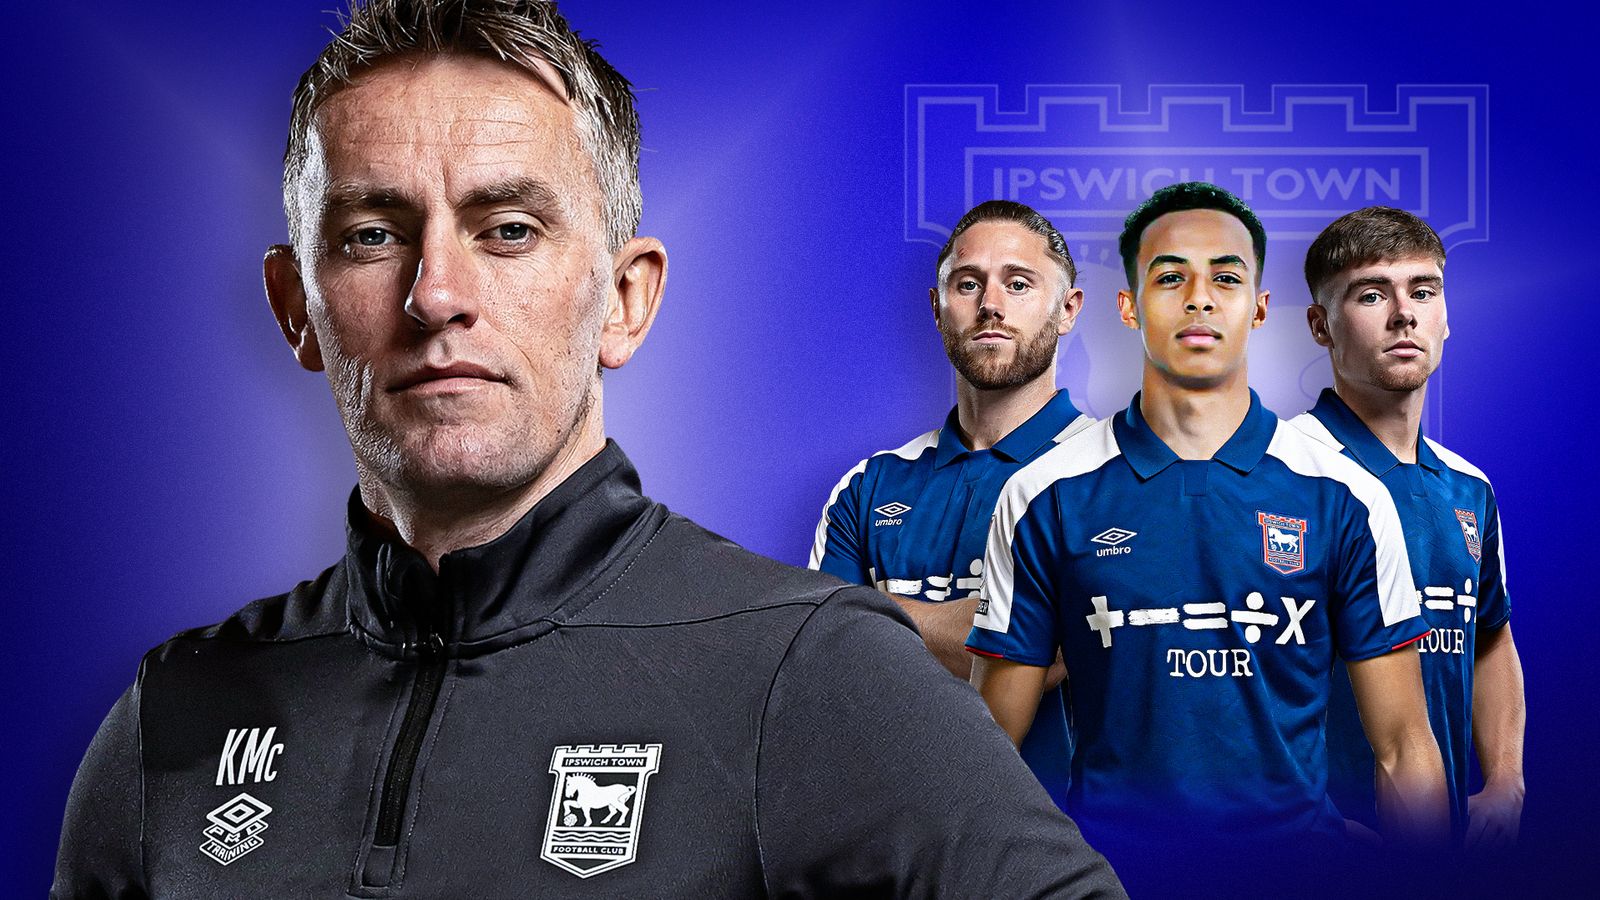 REPORT: Ipswich  Boss Kieran Mckenna announce  departure of  6 player  including both Hutchinson and wes Burns following…